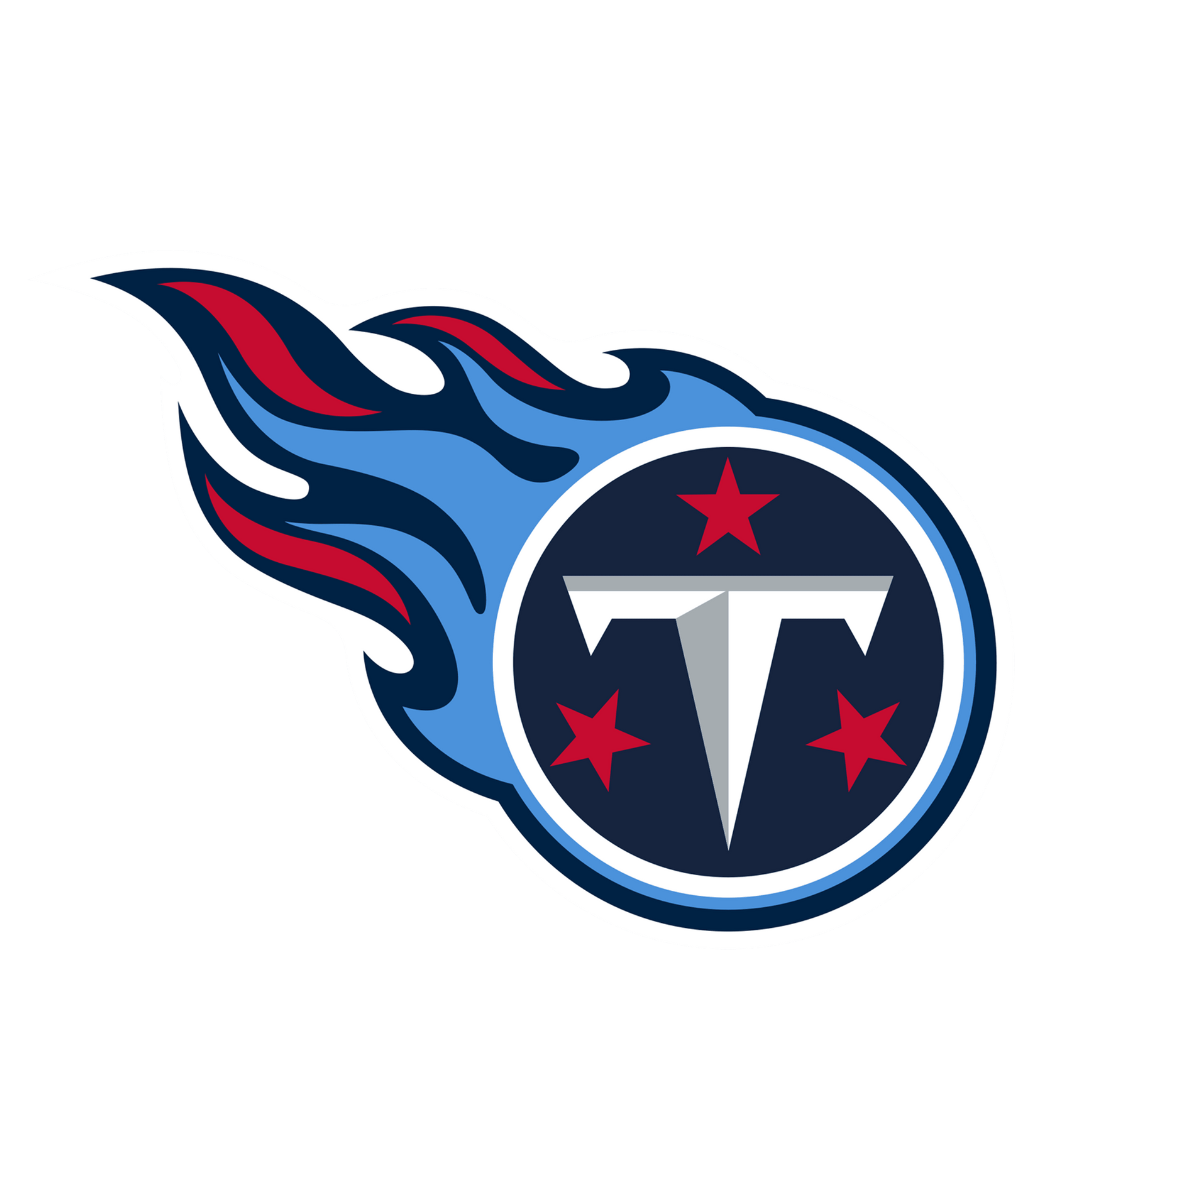 tennessee-titans